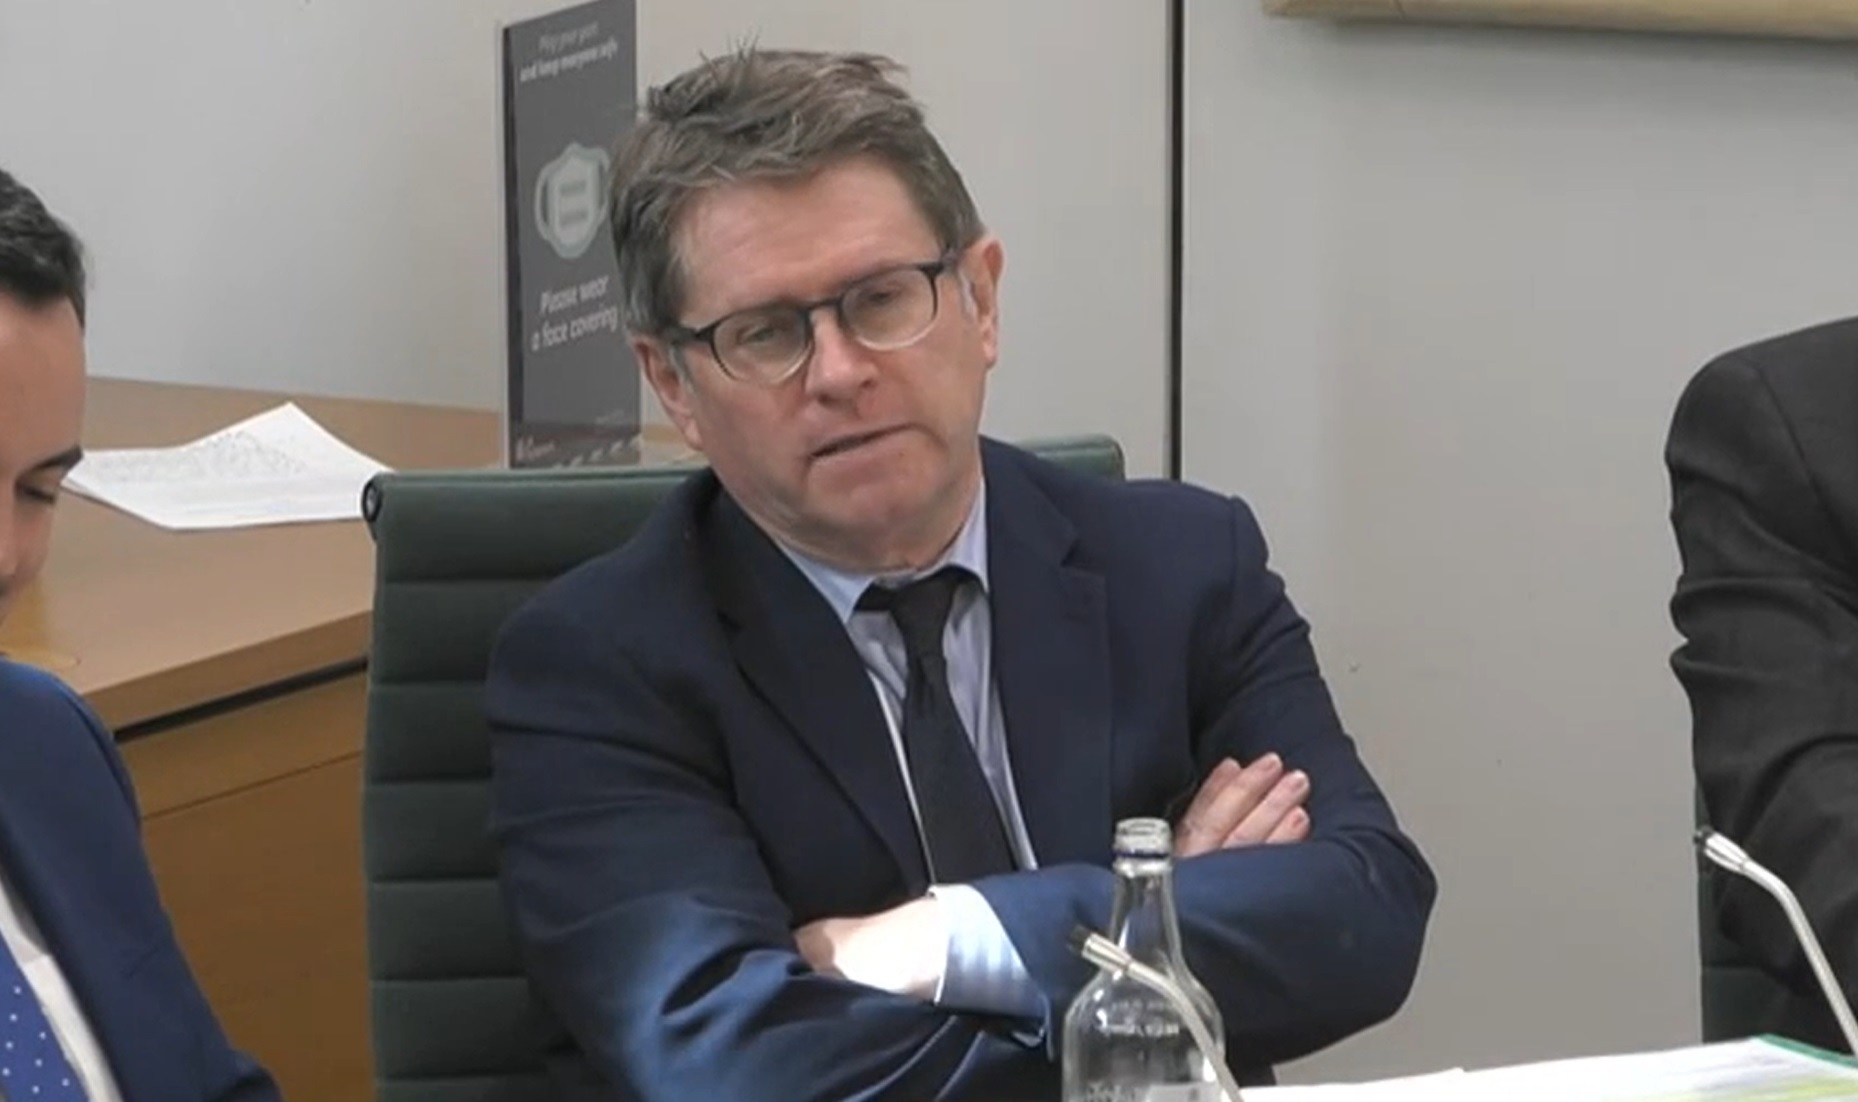 Labour MP Kevin Brennan questions Lord Grade at a DCMS committee hearing (Photo: Parliament)